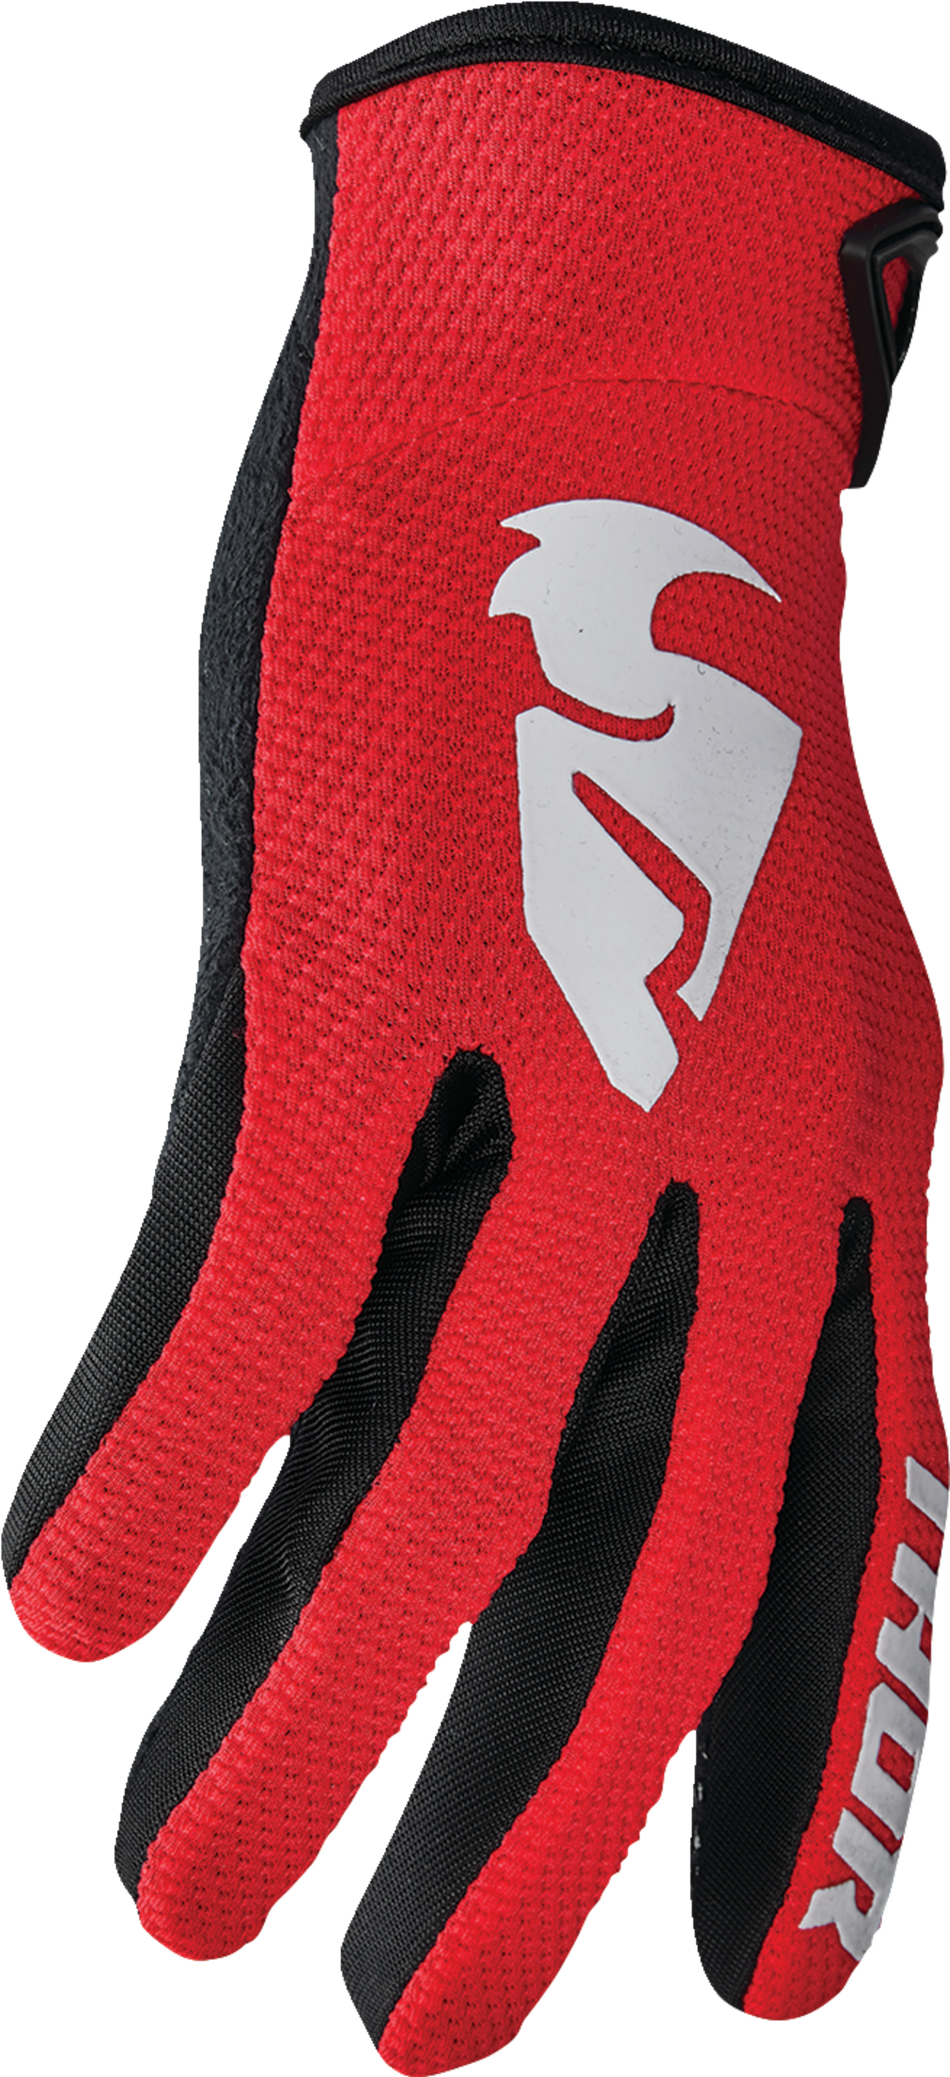 THOR Sector Gloves - Red/White - XL 3330-7271